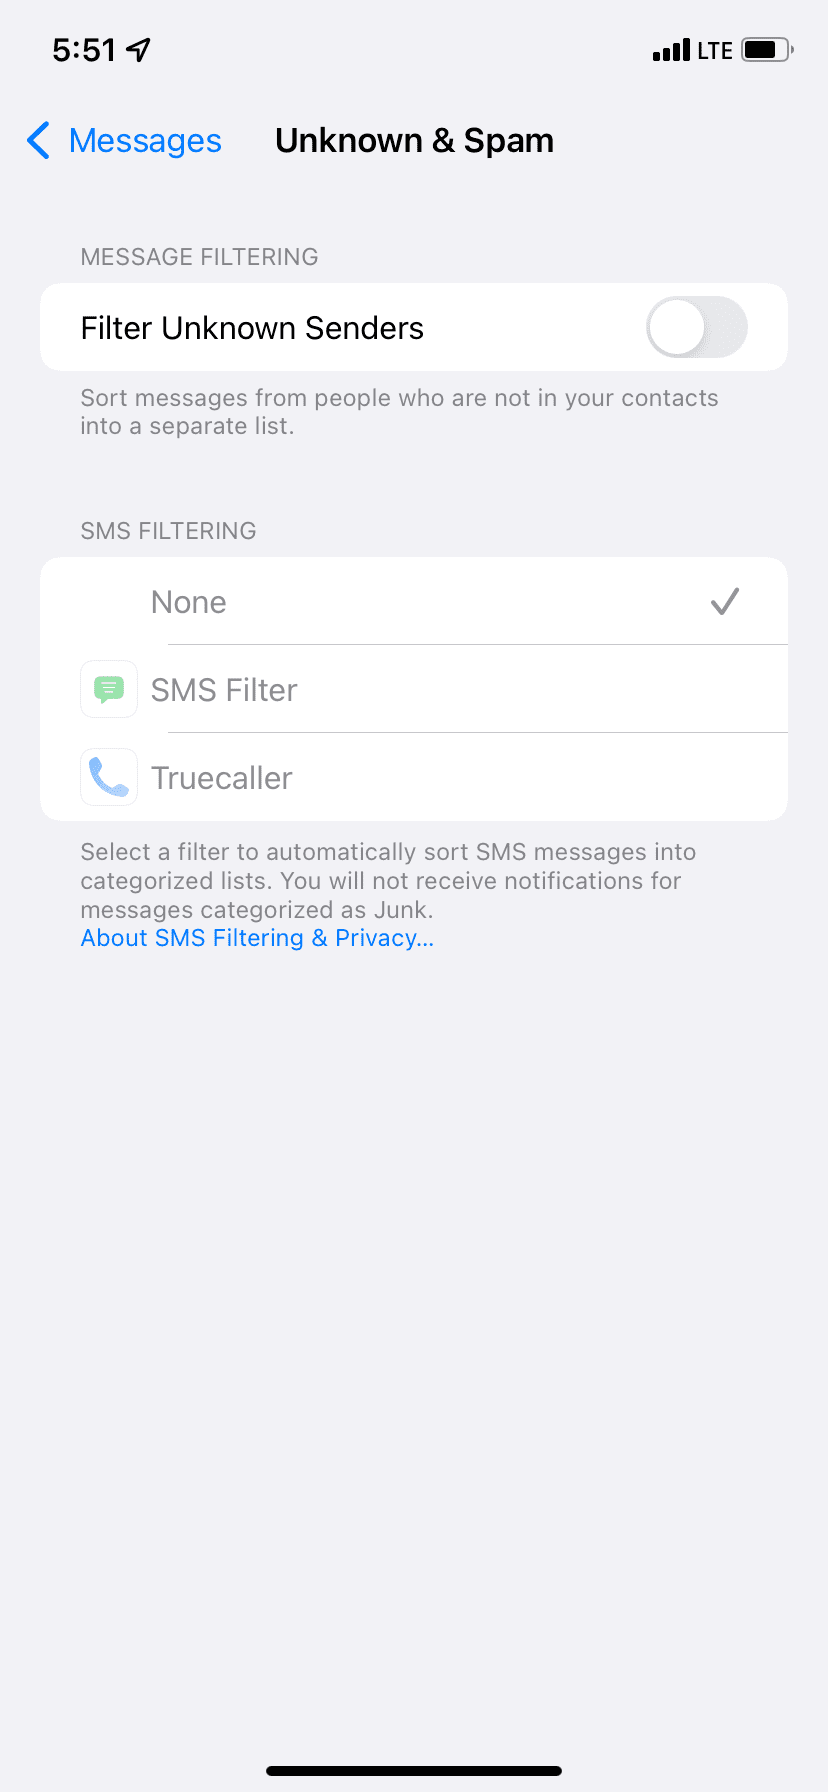 Turn off Filter Unknown Senders in iPhone Messages Settings